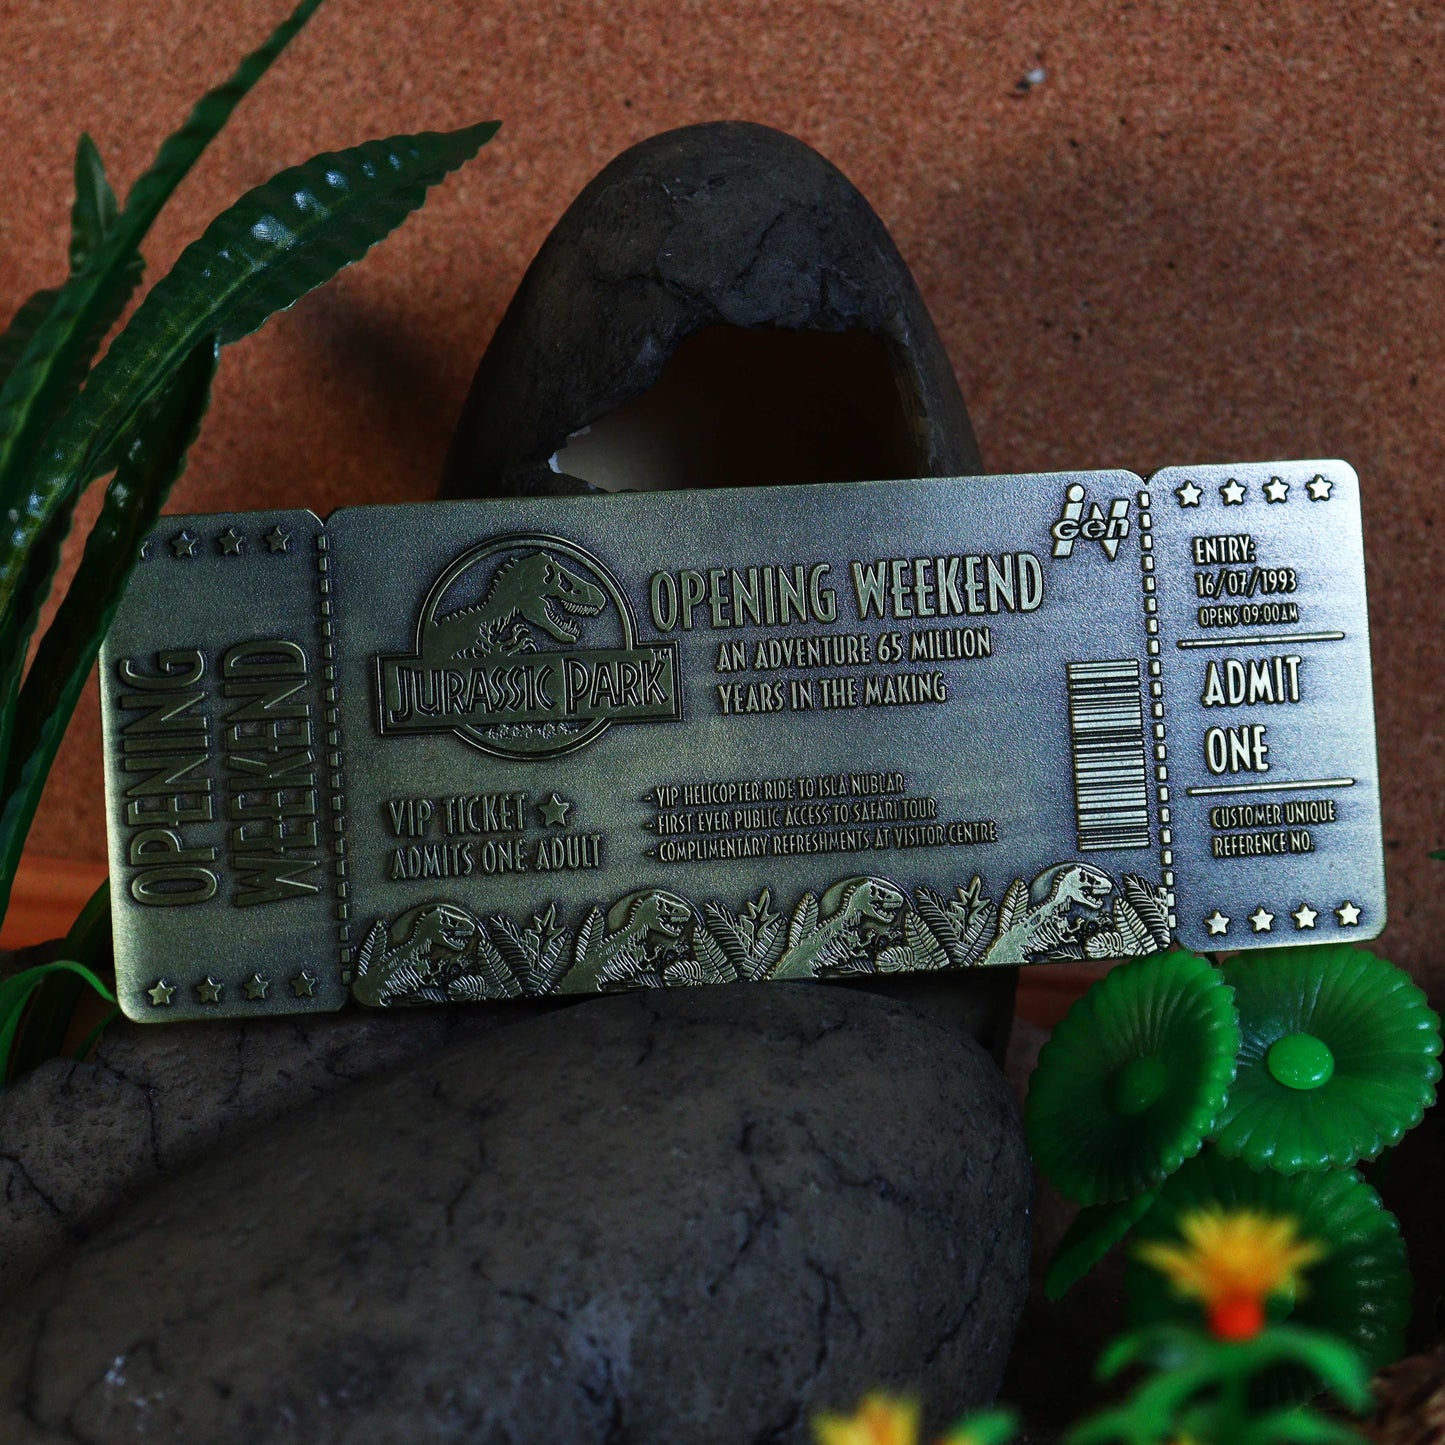 Jurassic Park Limited Edition 30th Anniversary Opening Weekend Ticket